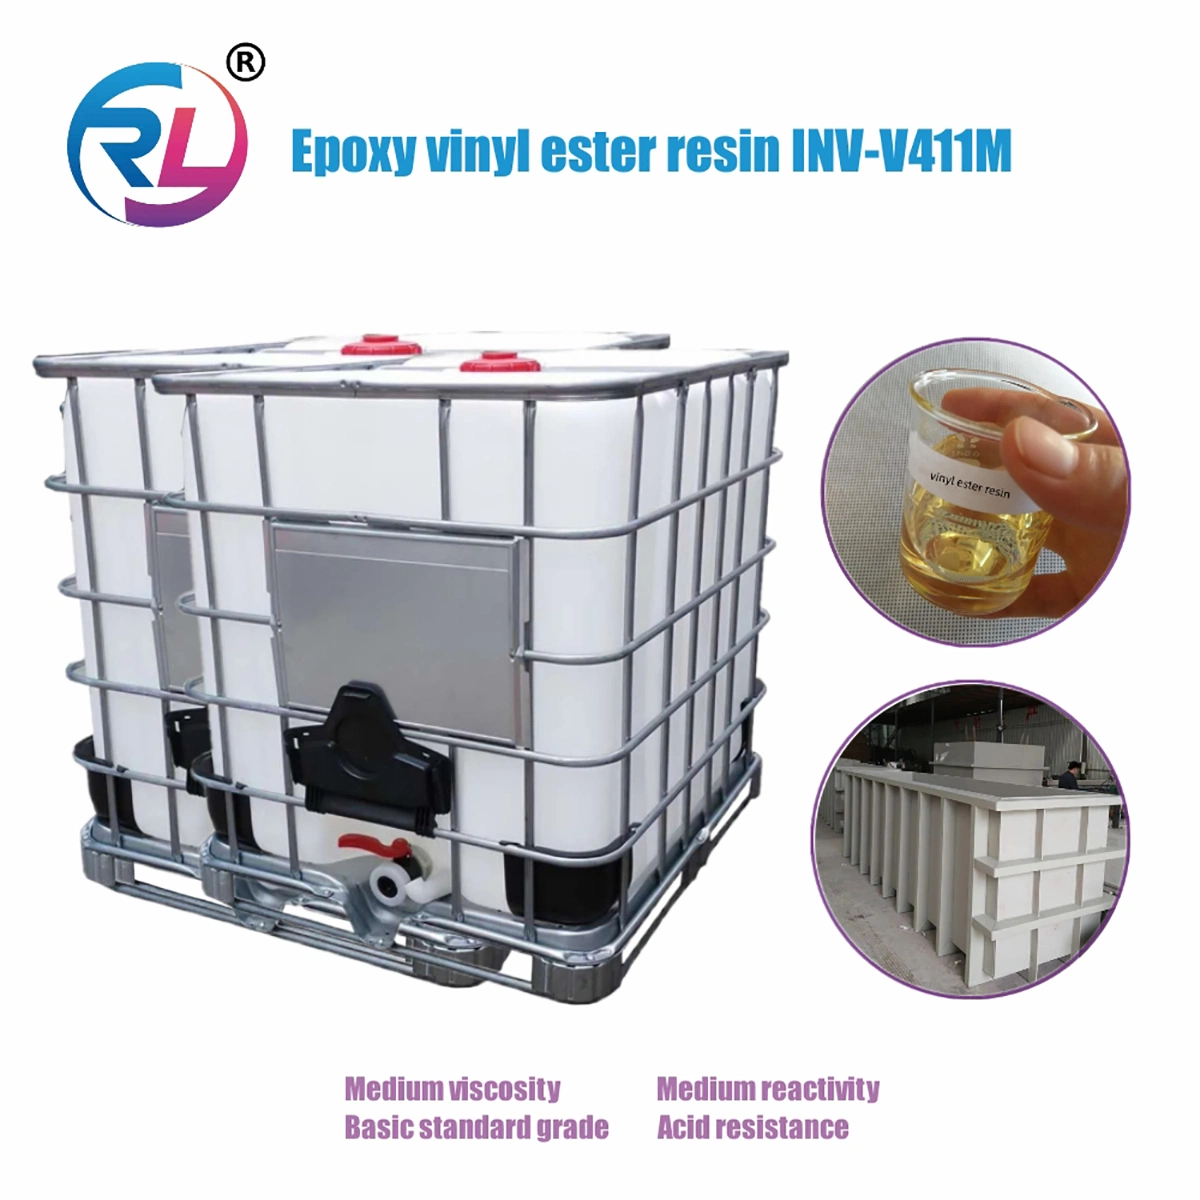 Epoxy Vinyl Ester Resin Inv-V411m with High Corrosion Resistance Can Be Obtained